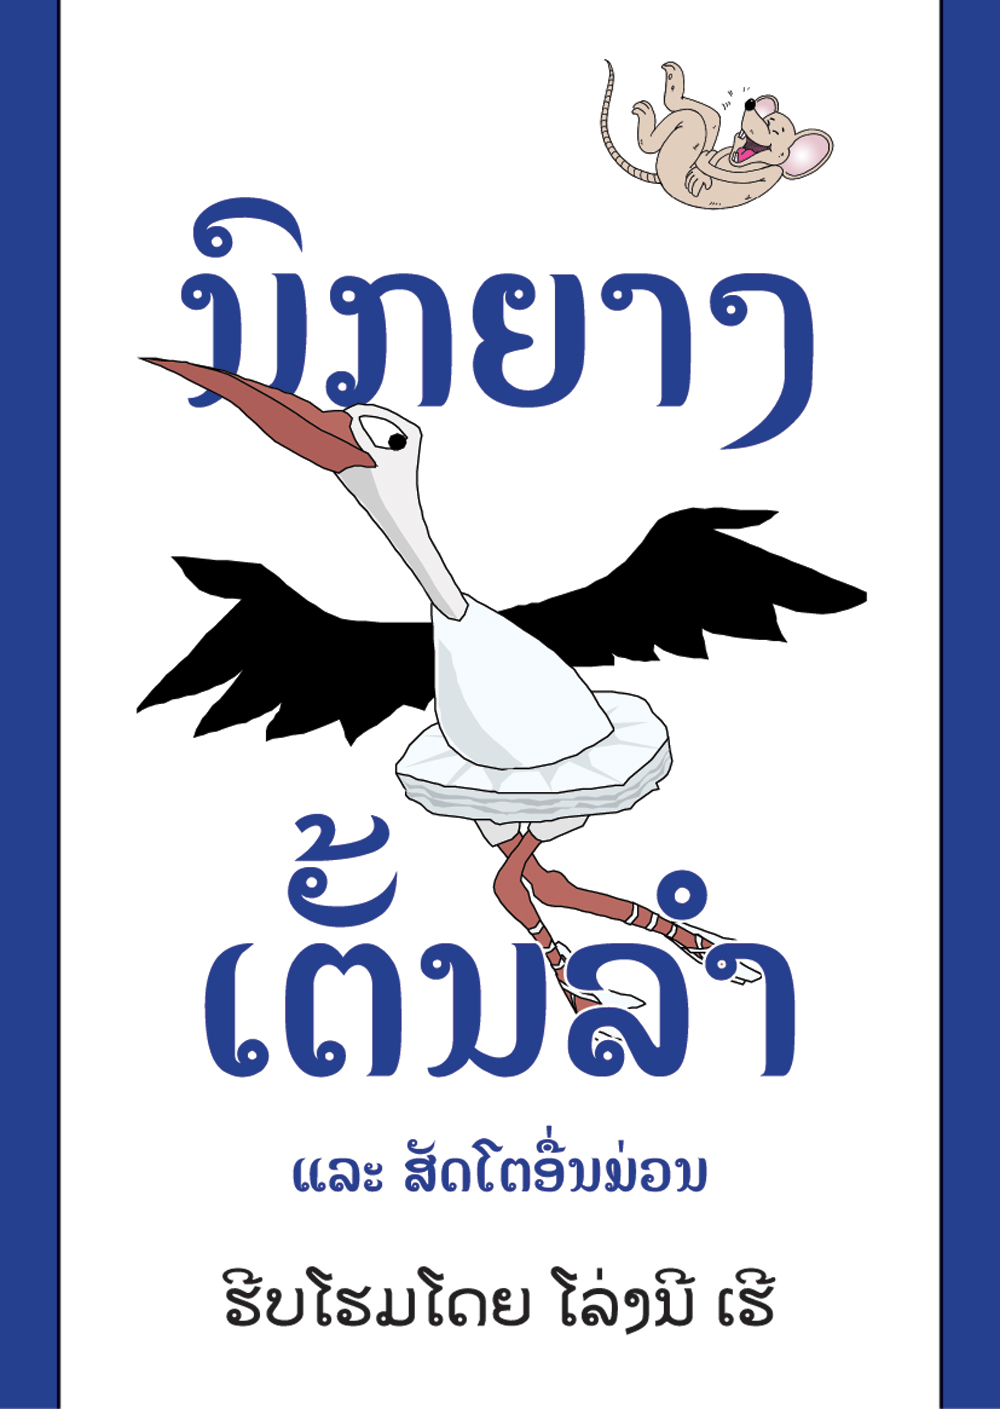 The Dancing Stork large book cover, published in Lao language